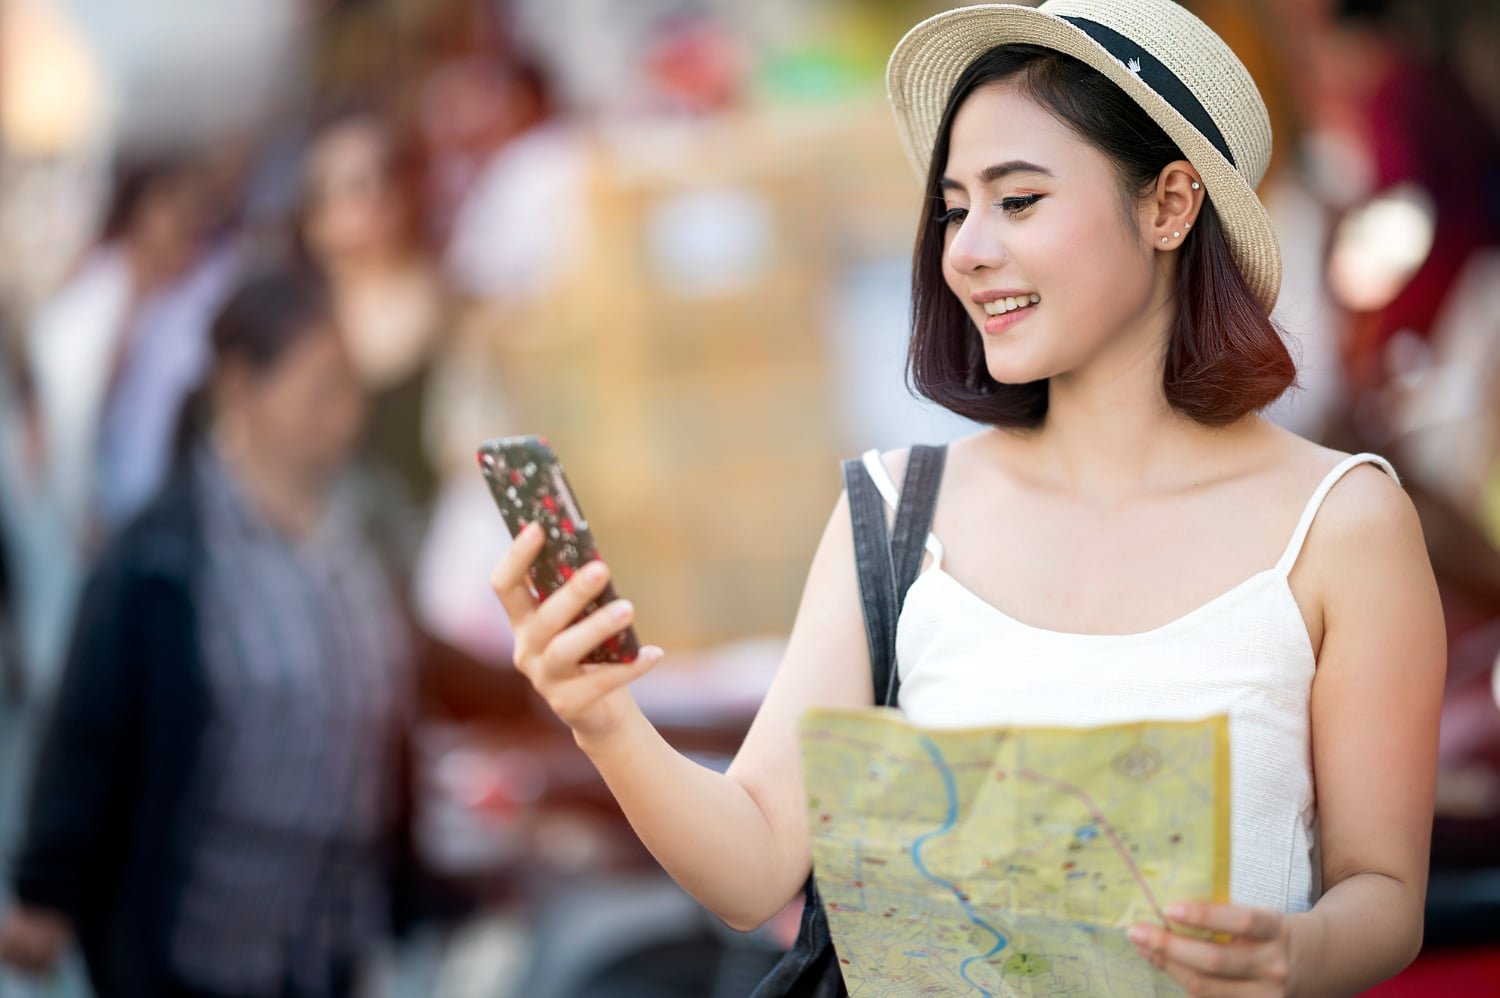 Stay Connected Abroad With ESIM JAPAN’s Convenient Travel SIM Solutions